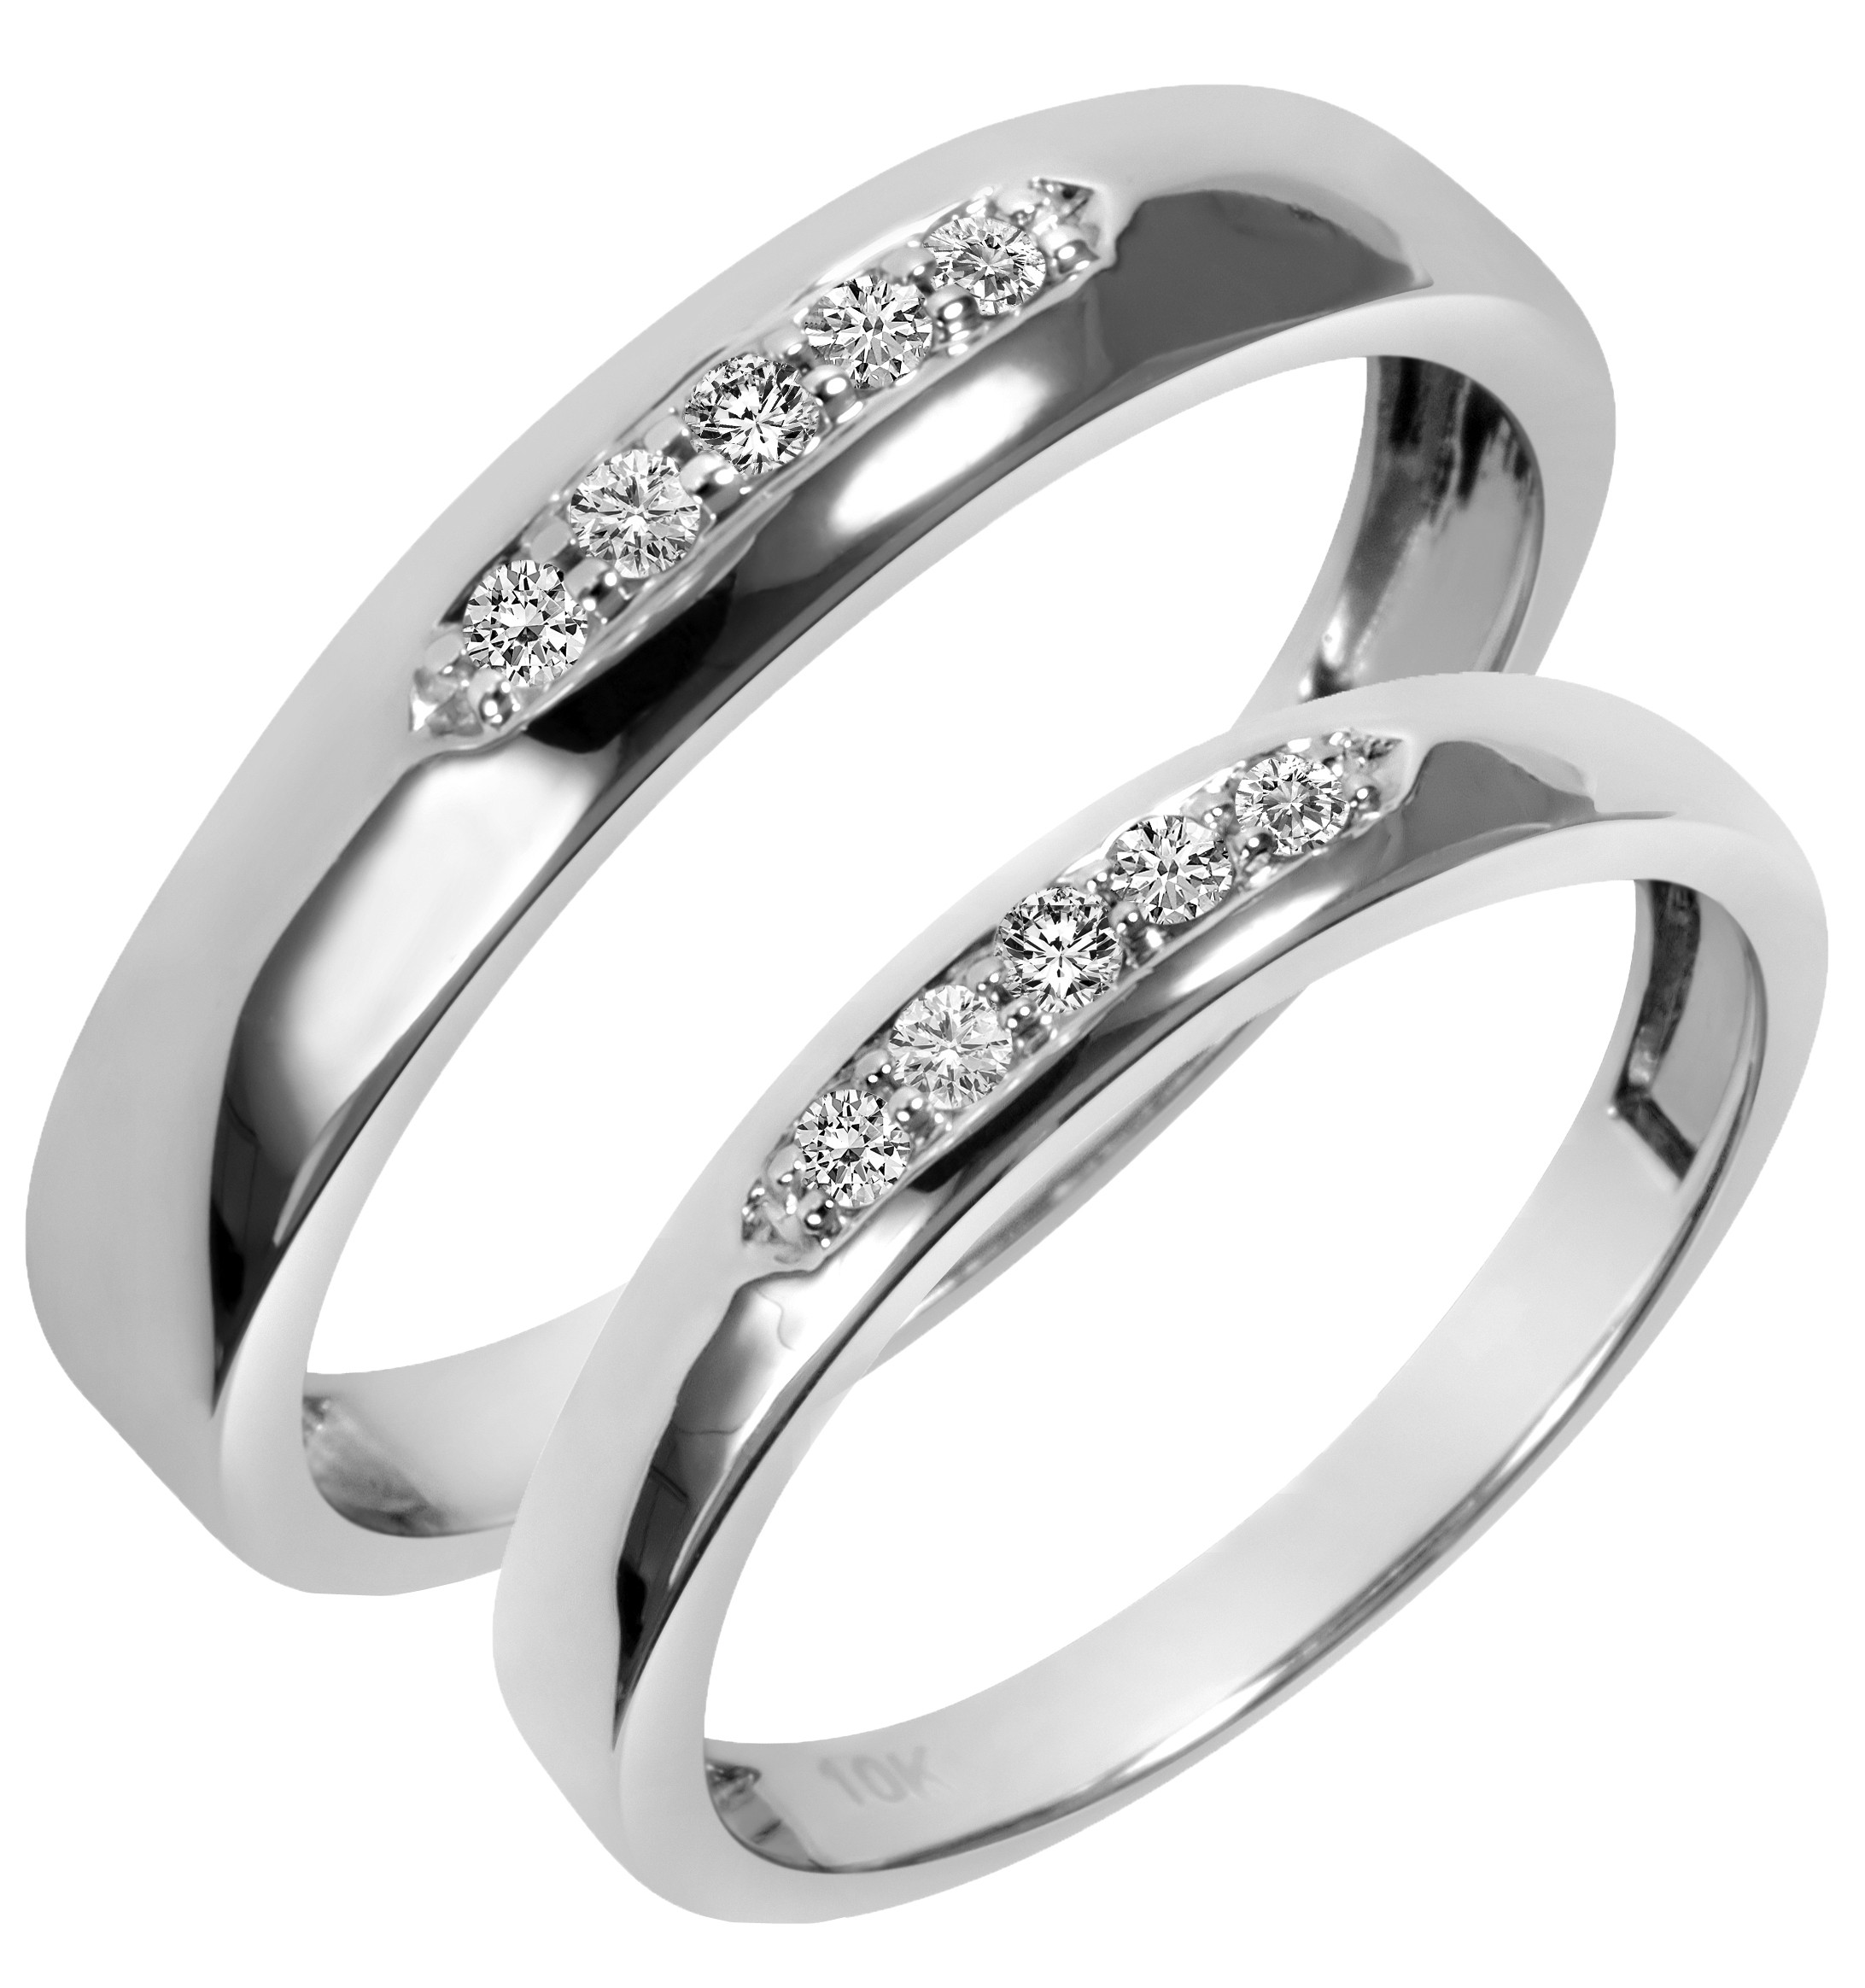 Matching Wedding Bands White Gold
 Gallery Zales Matching Wedding Bands Matvuk